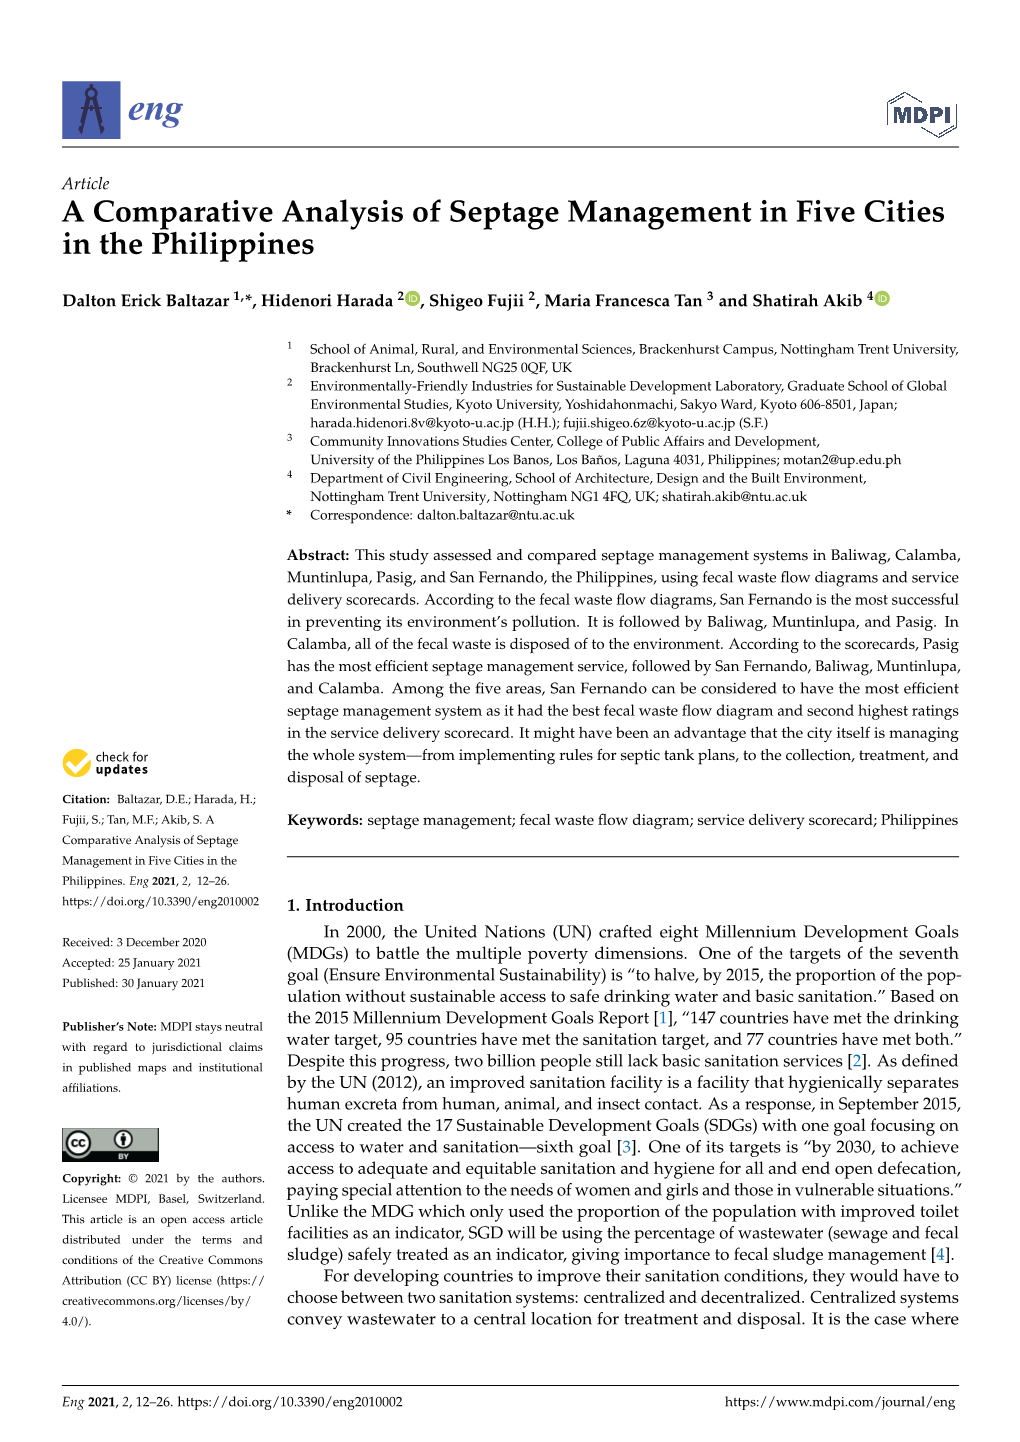 A Comparative Analysis of Septage Management in Five Cities in the Philippines